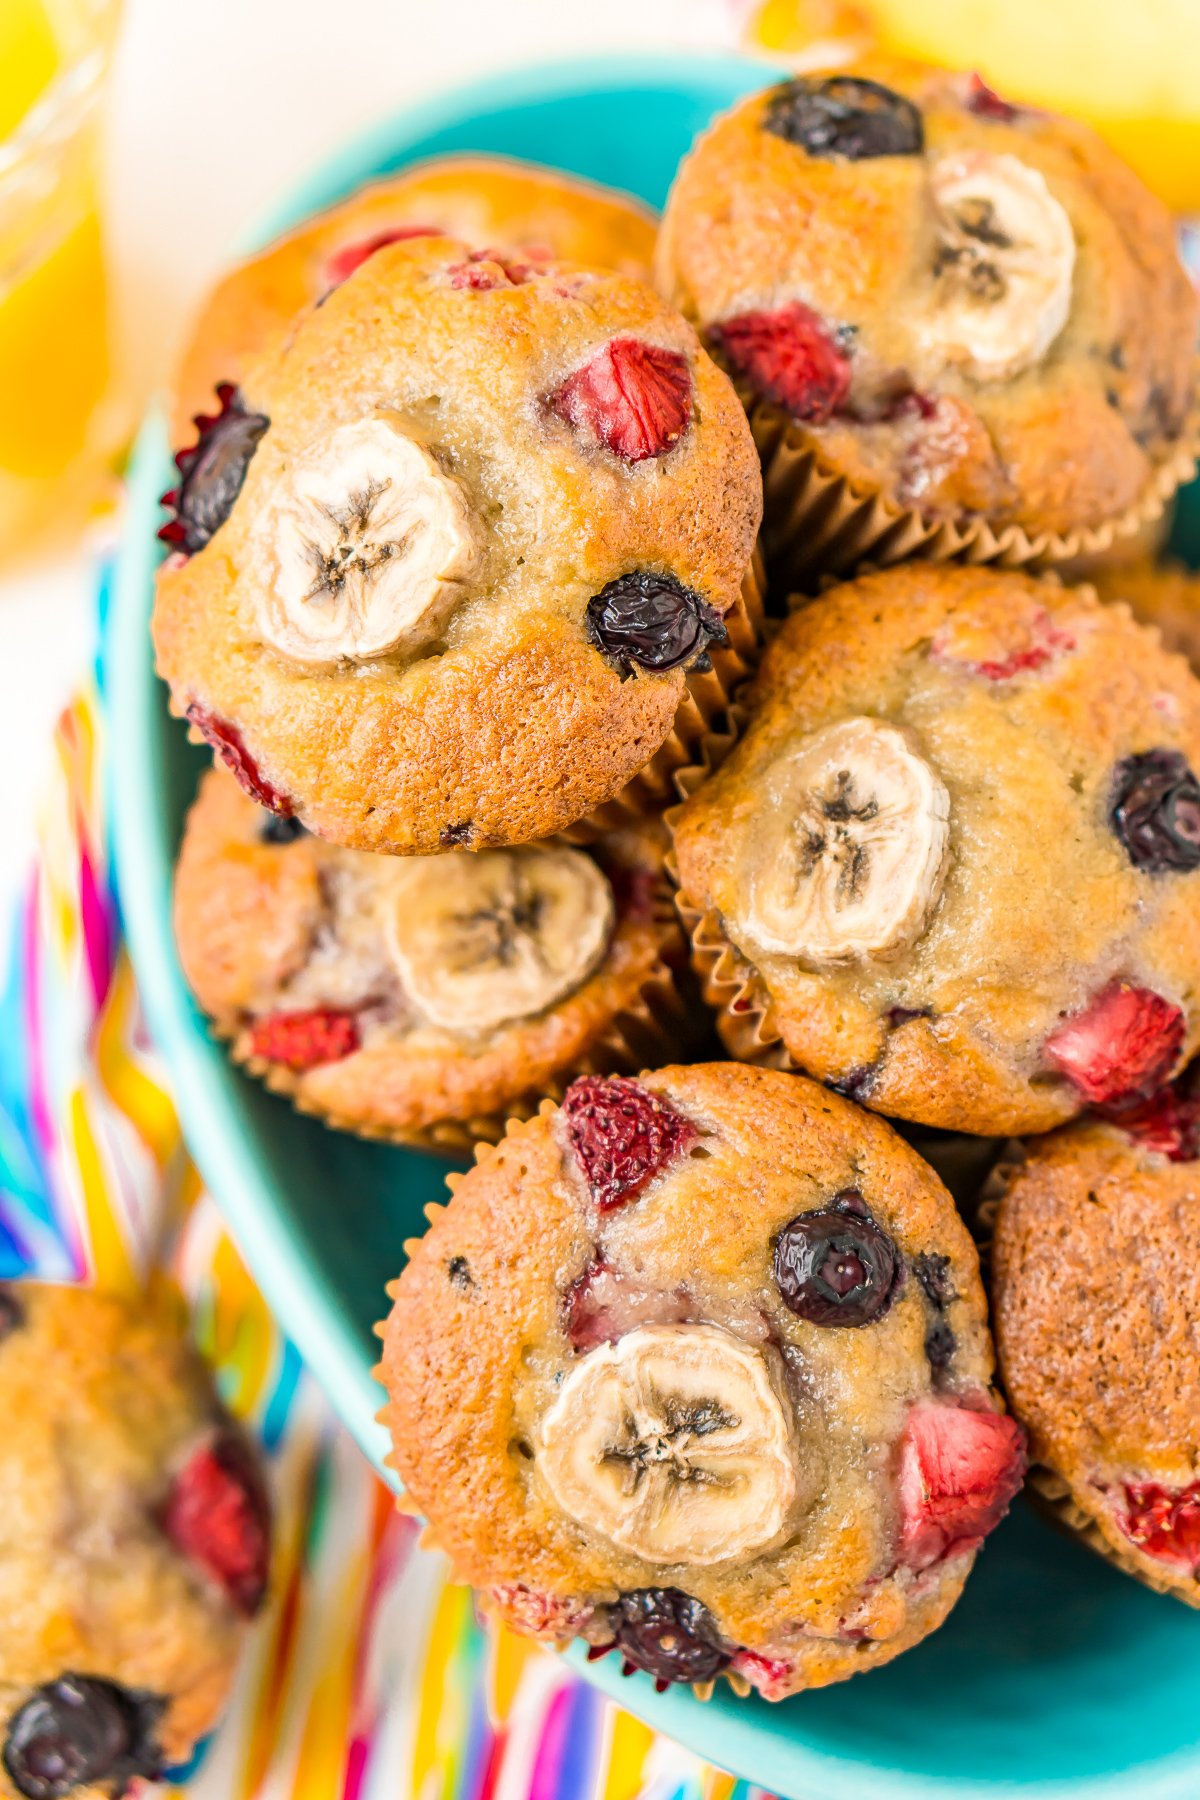 Muffins with banana and berries piled in a teal bowl.